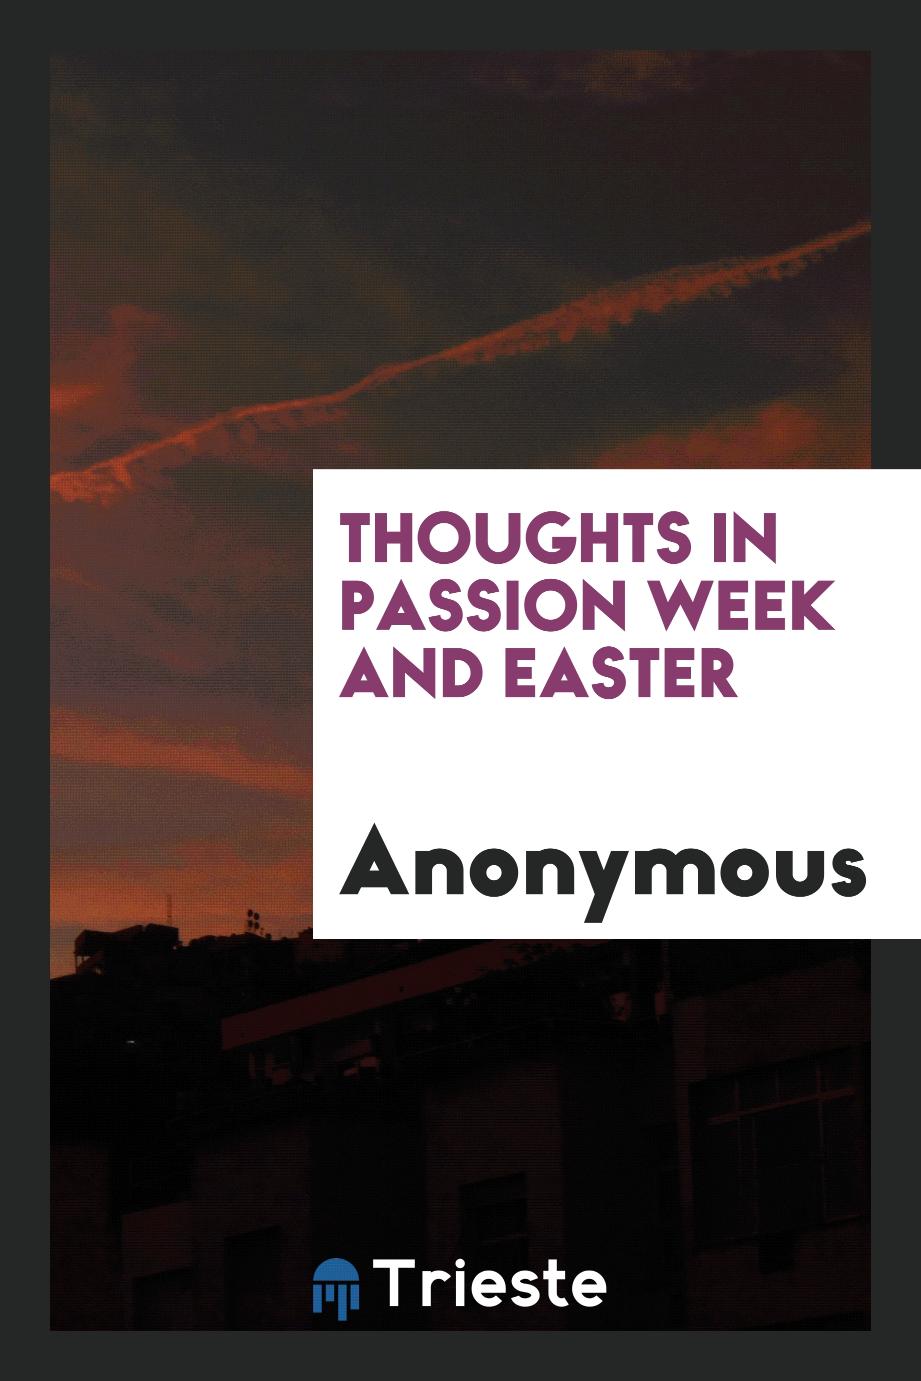 Thoughts in Passion Week and Easter